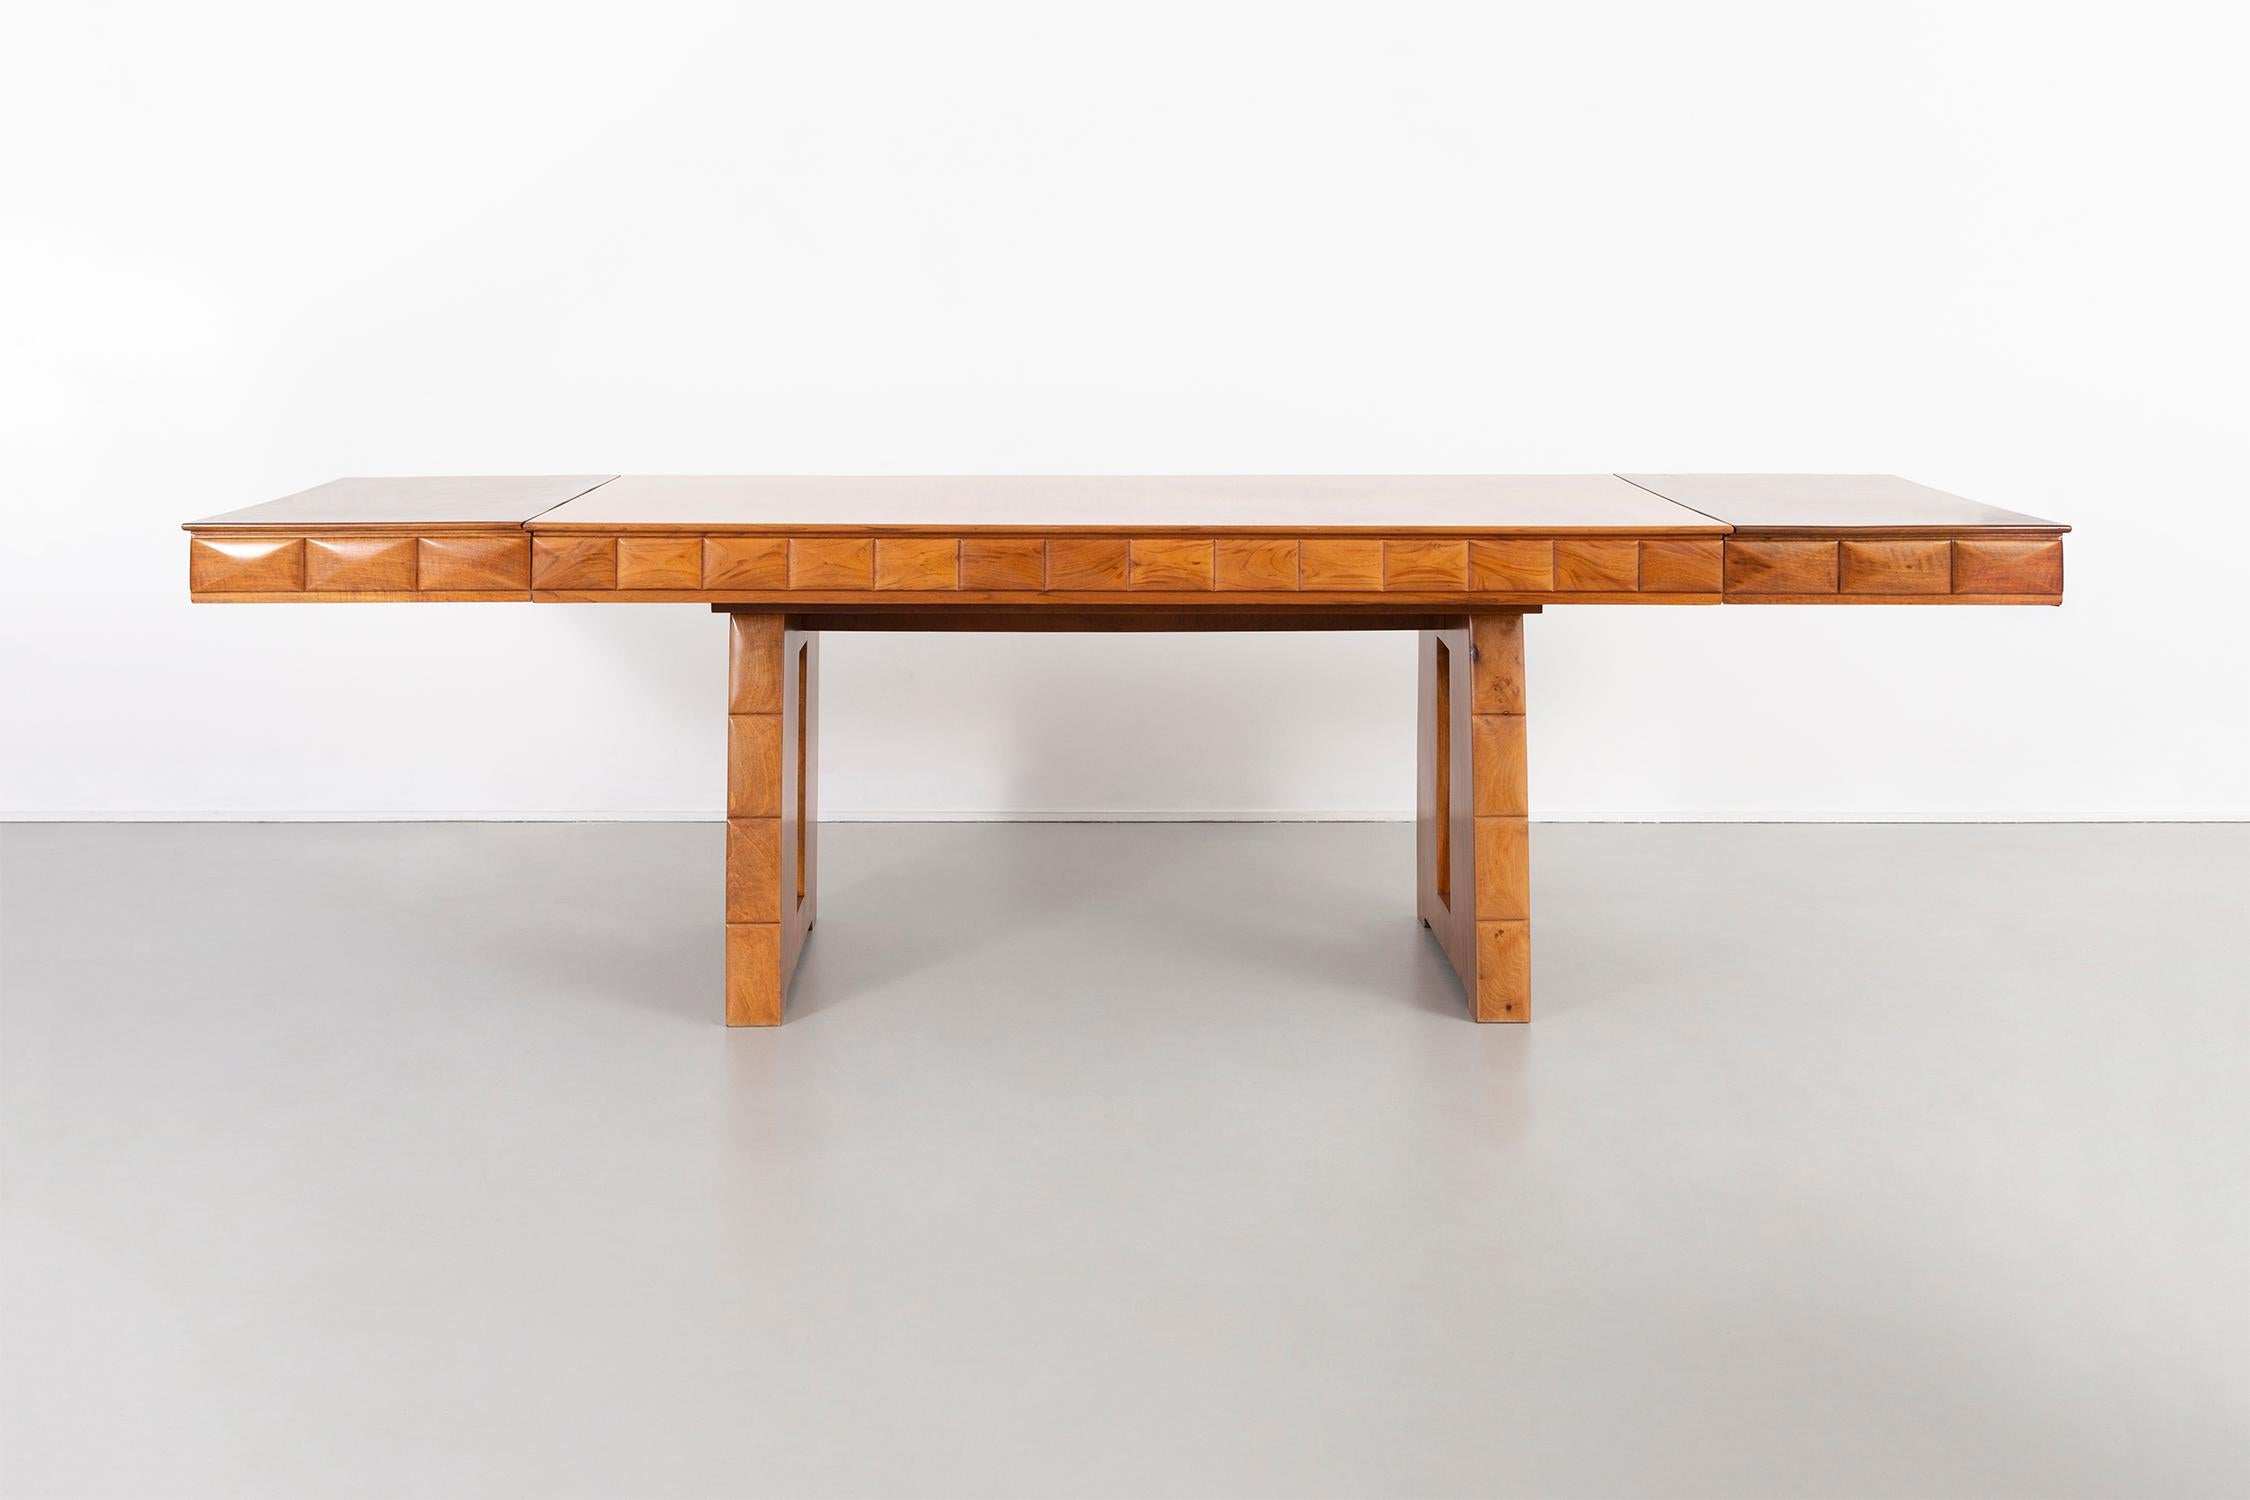 Dining table

designed by Paolo Buffa 

Italy, circa 1938

Walnut

Not extended 30 ¾” H x 70 ?” W x 35 ¼” D

Extended with two leaves 30 ¾” H x 111 ?” W x 35 ¼” D

Each leaf is 20 ?